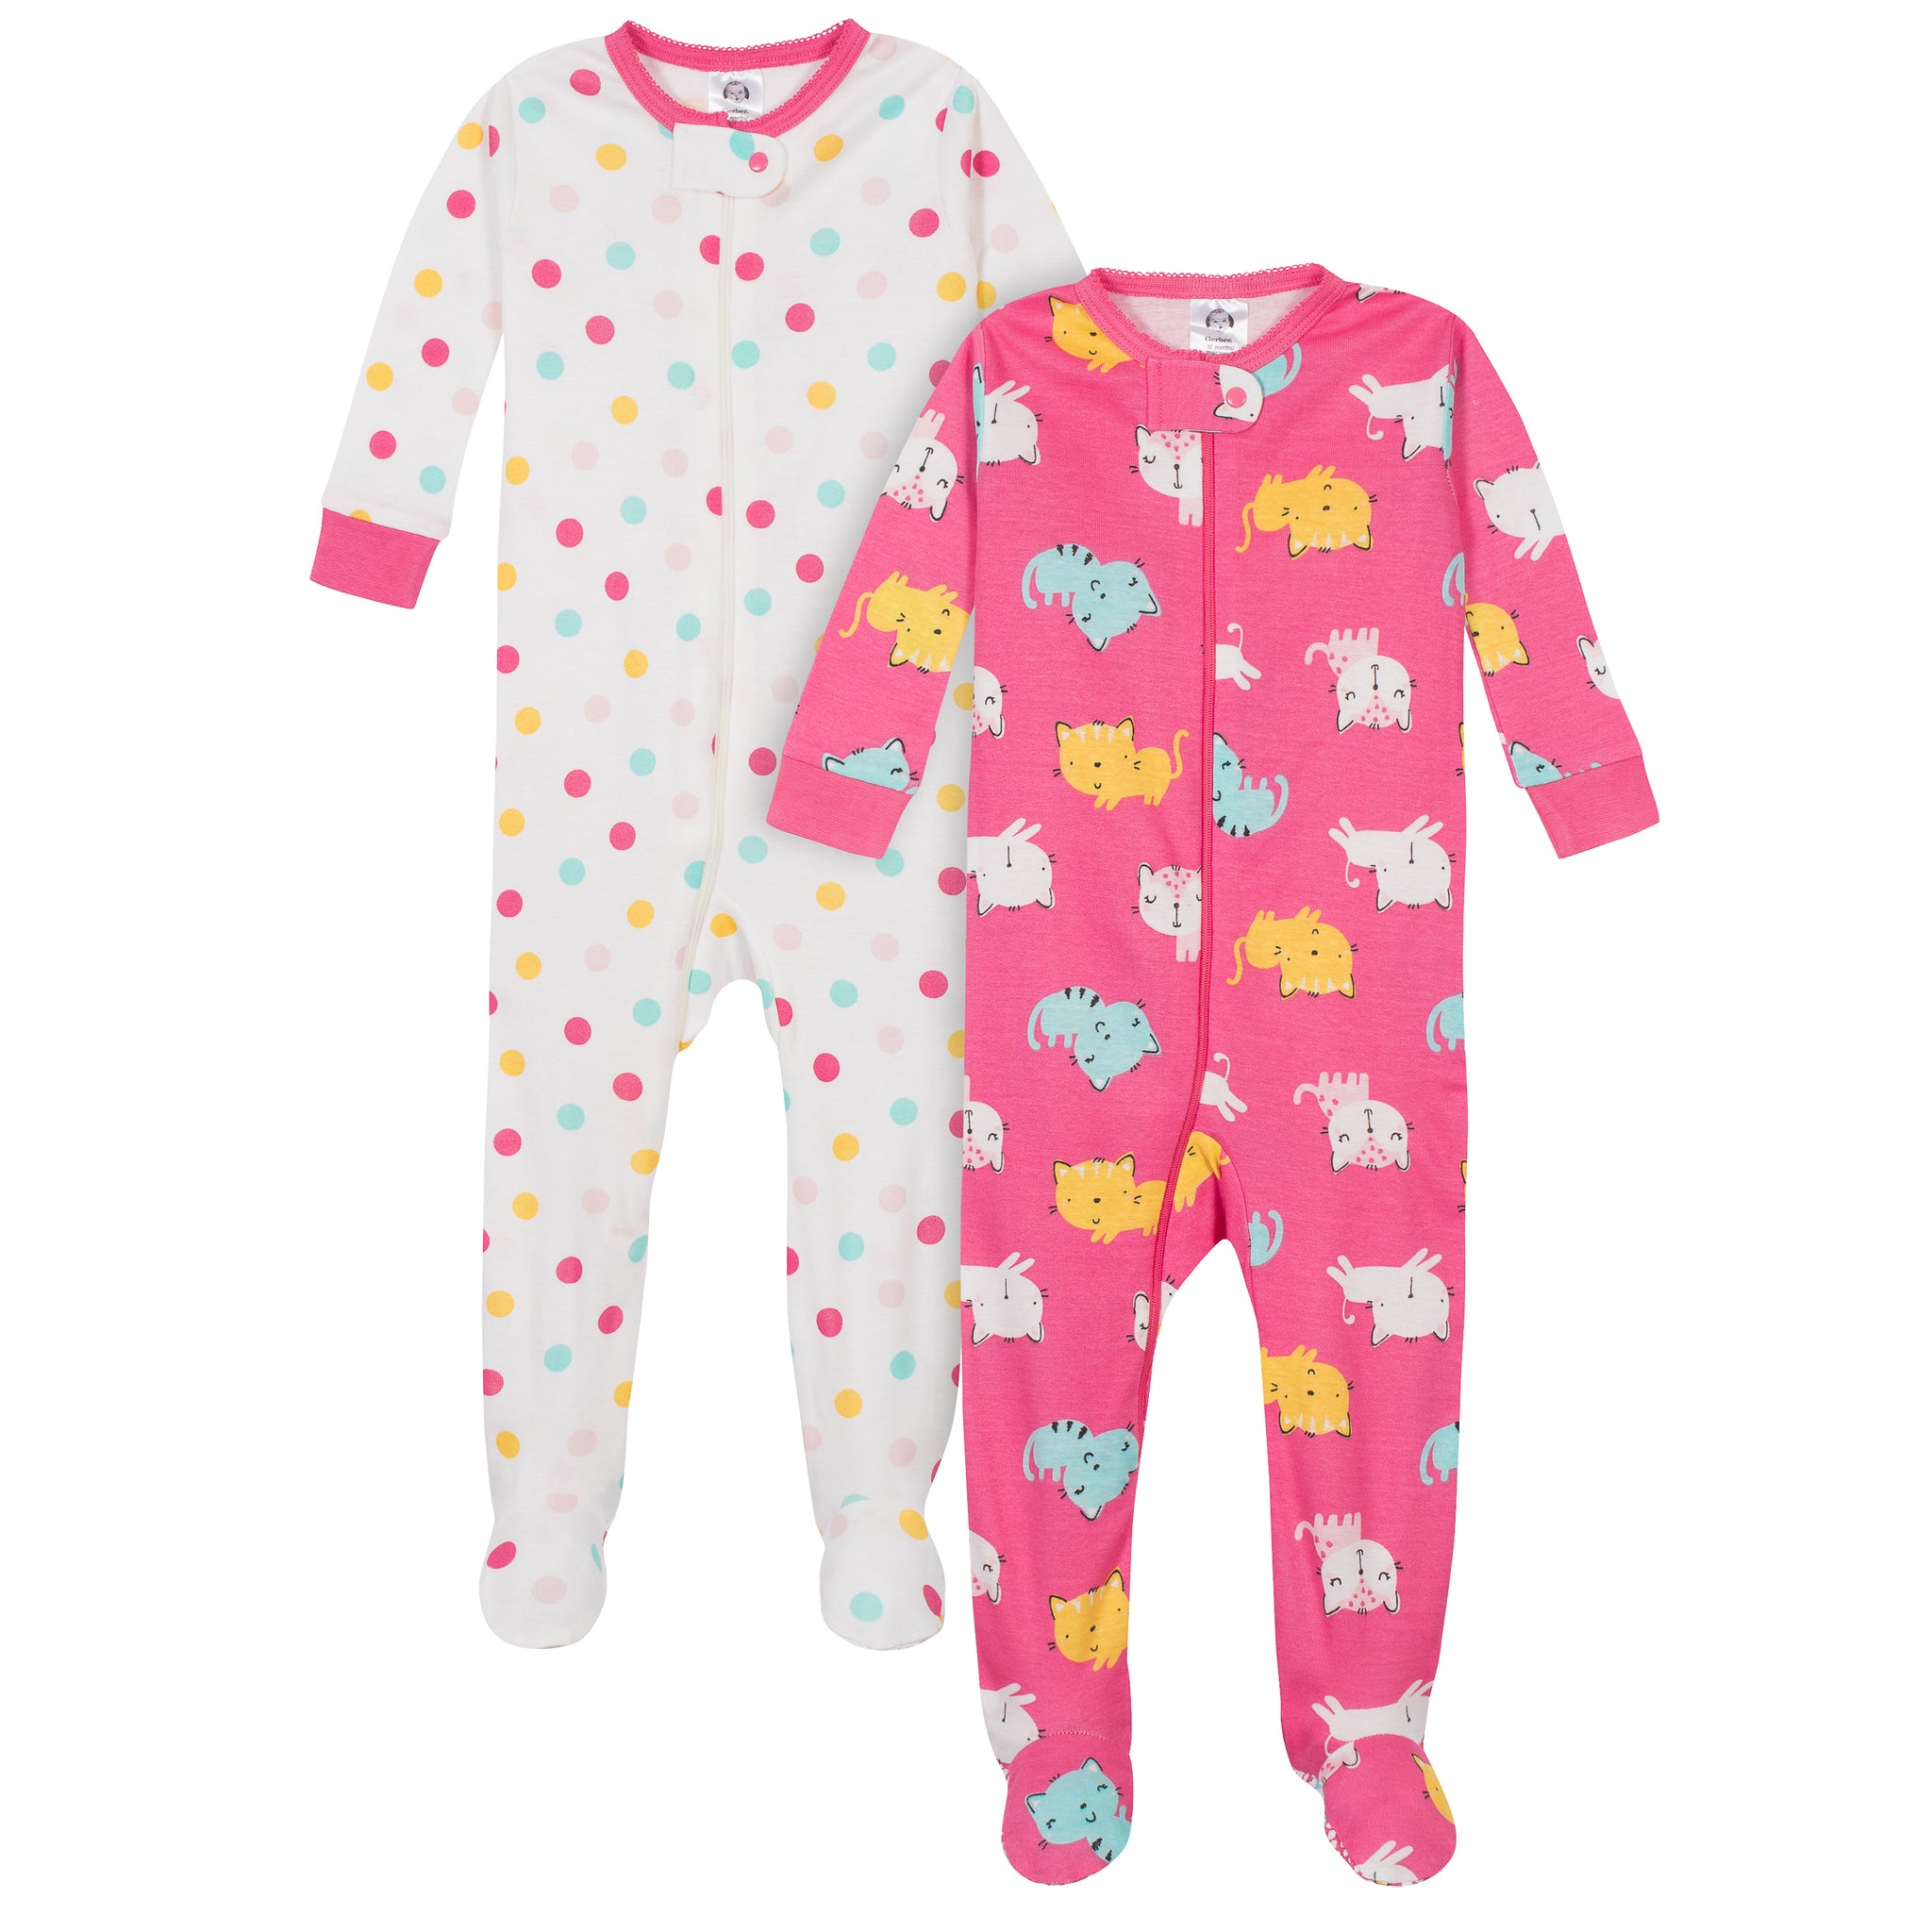 2-Pack Girls Cats Snug Fit Footed Cotton Pajamas-Gerber Childrenswear Wholesale